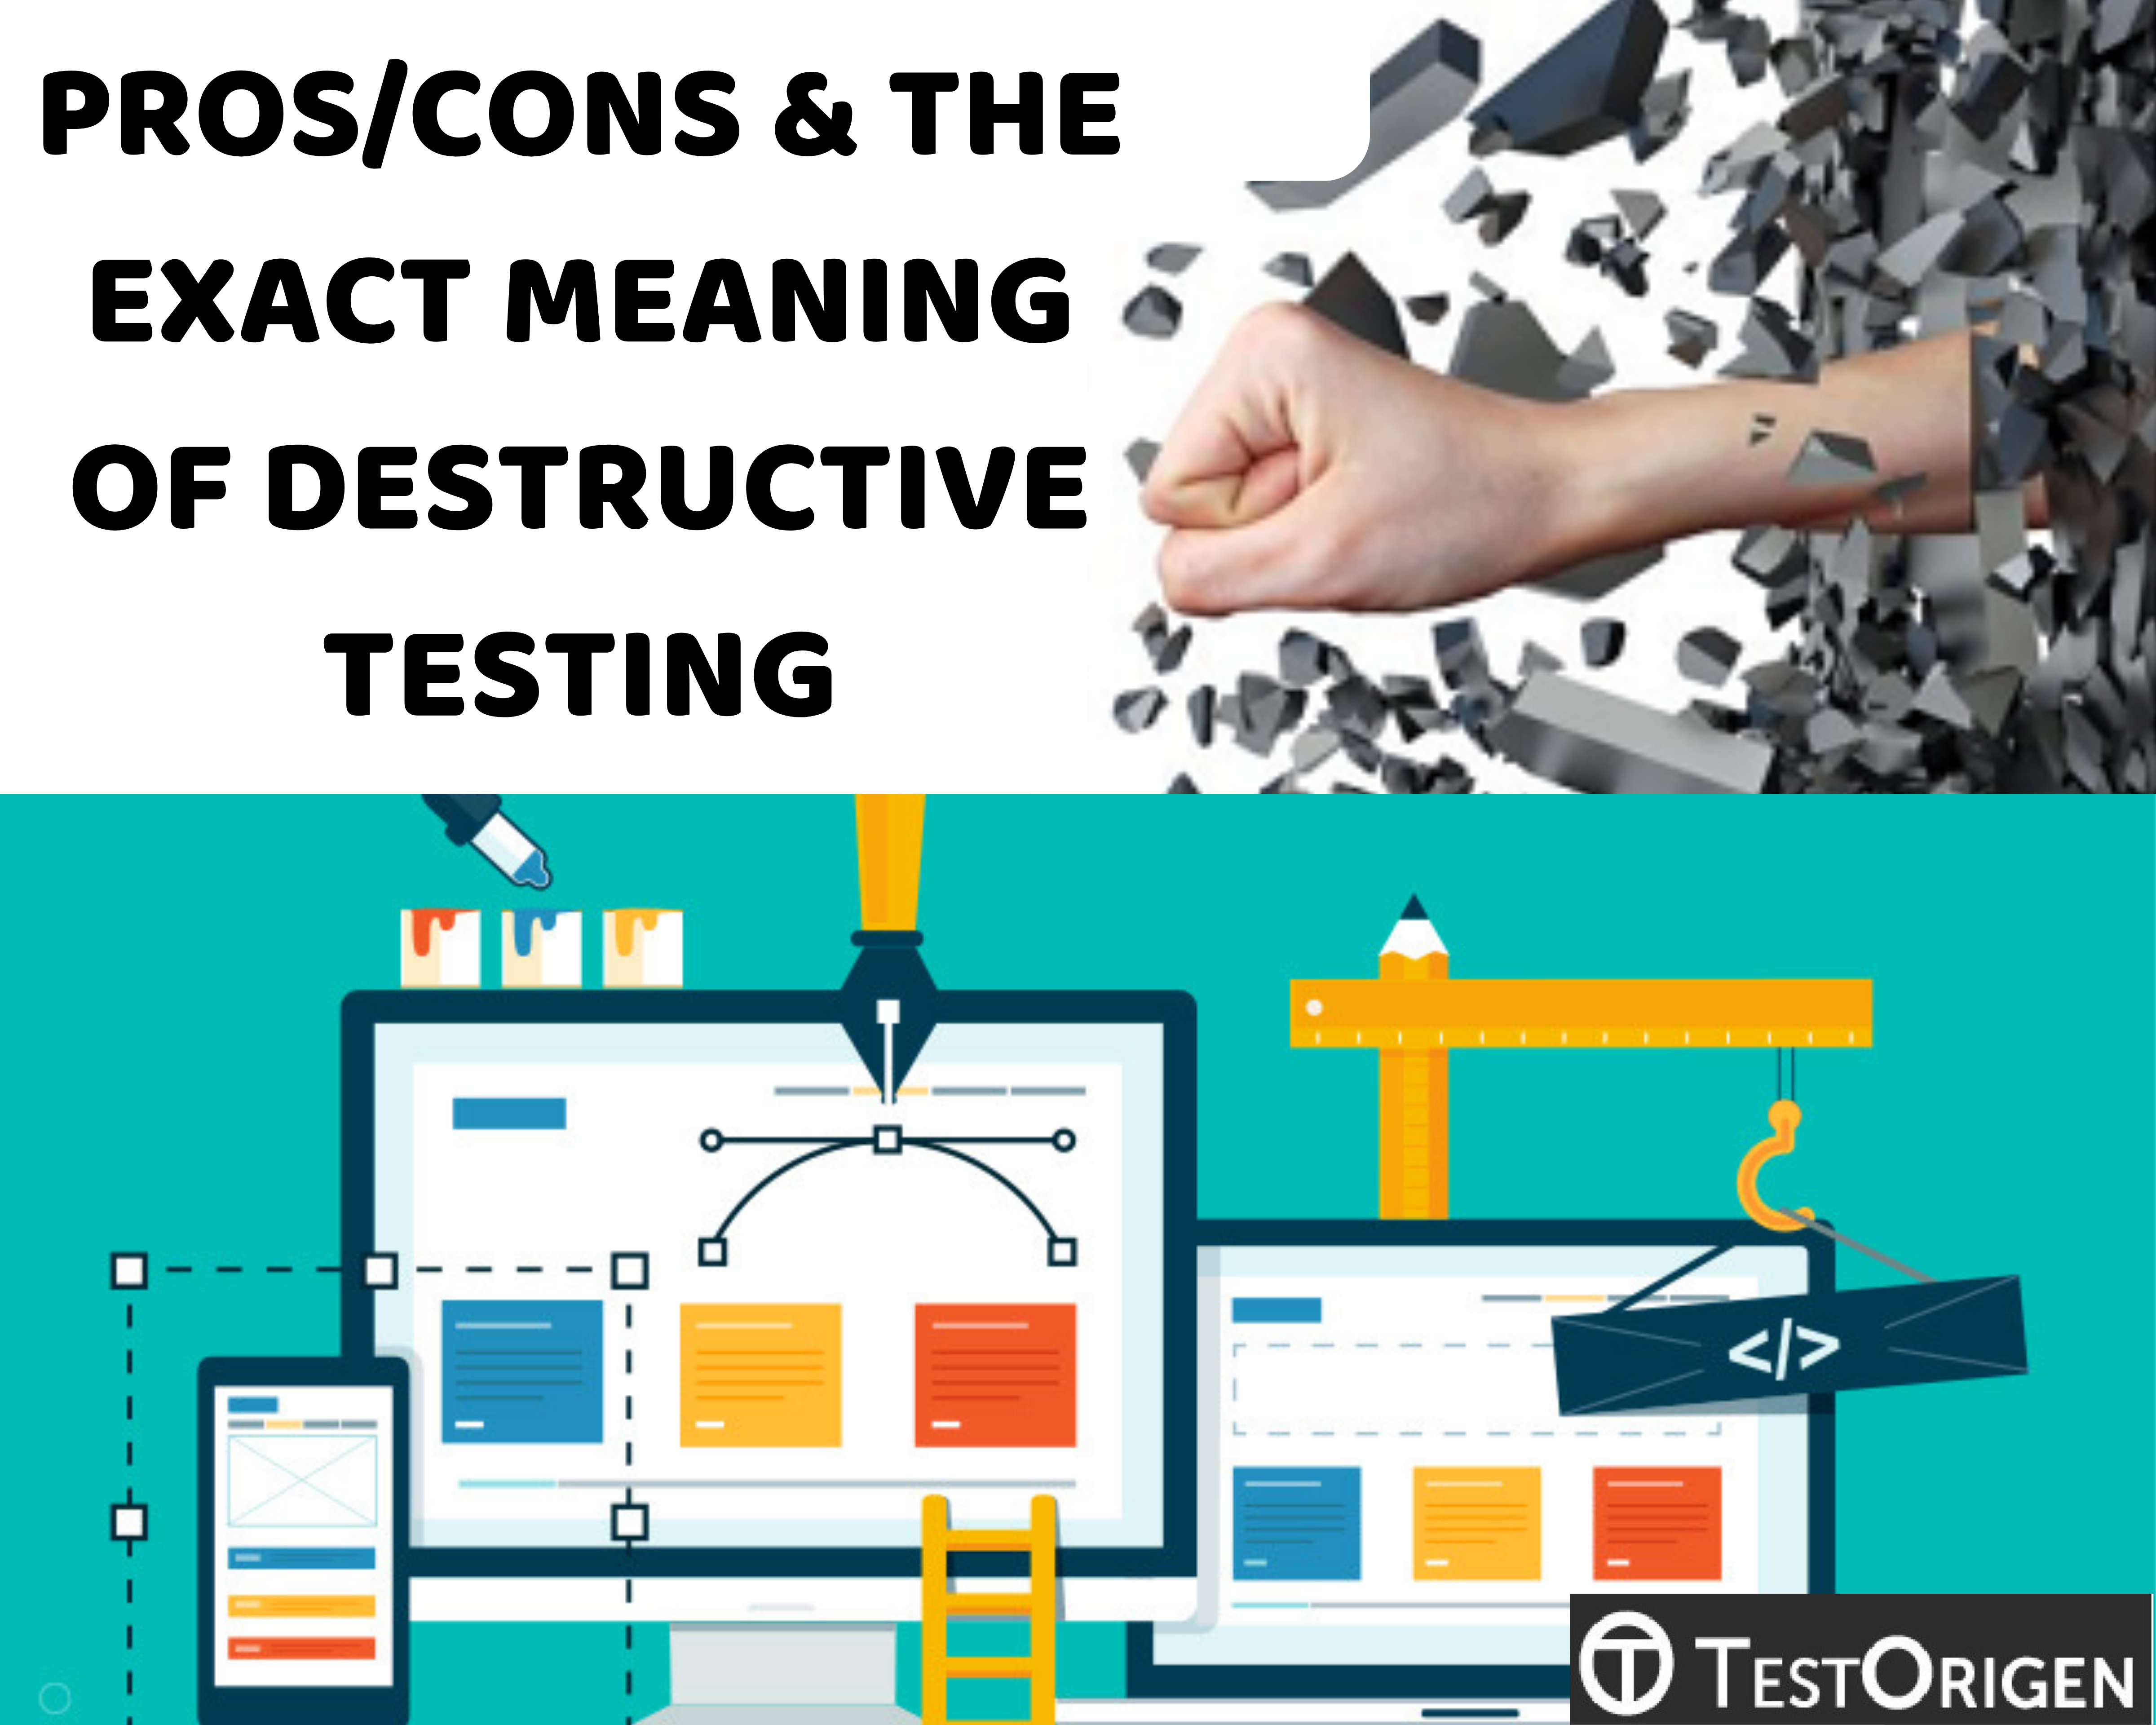 Pros/Cons & the Exact Meaning of Destructive Testing